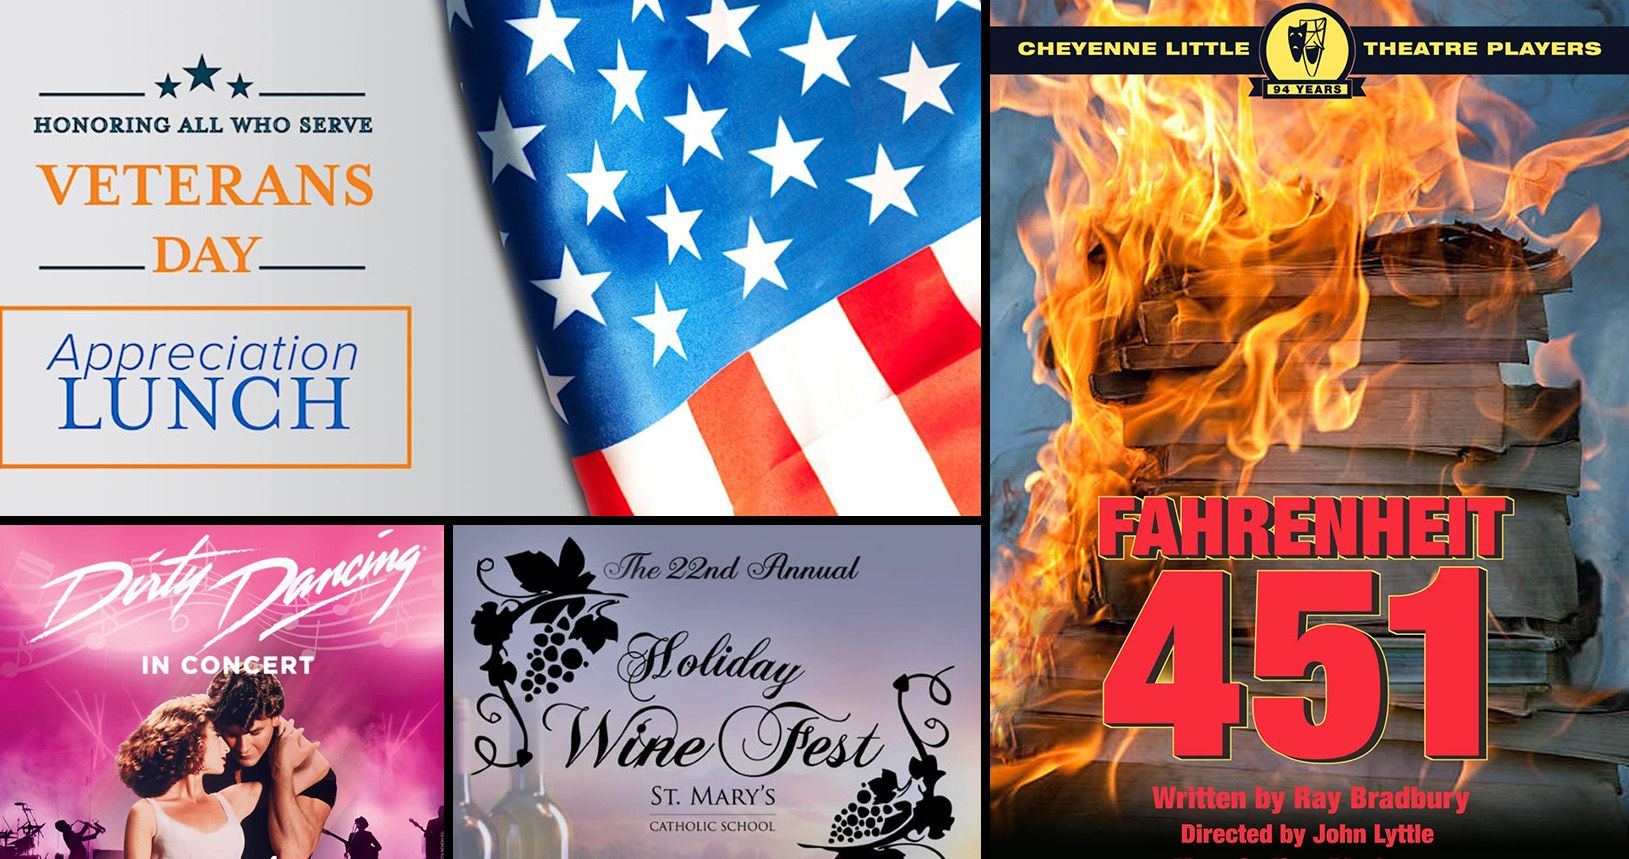 Veterans Day, Fahrenheit 451, Holiday Wine Fest, Dirty Dancing  And So Much More Happening This Weekend!